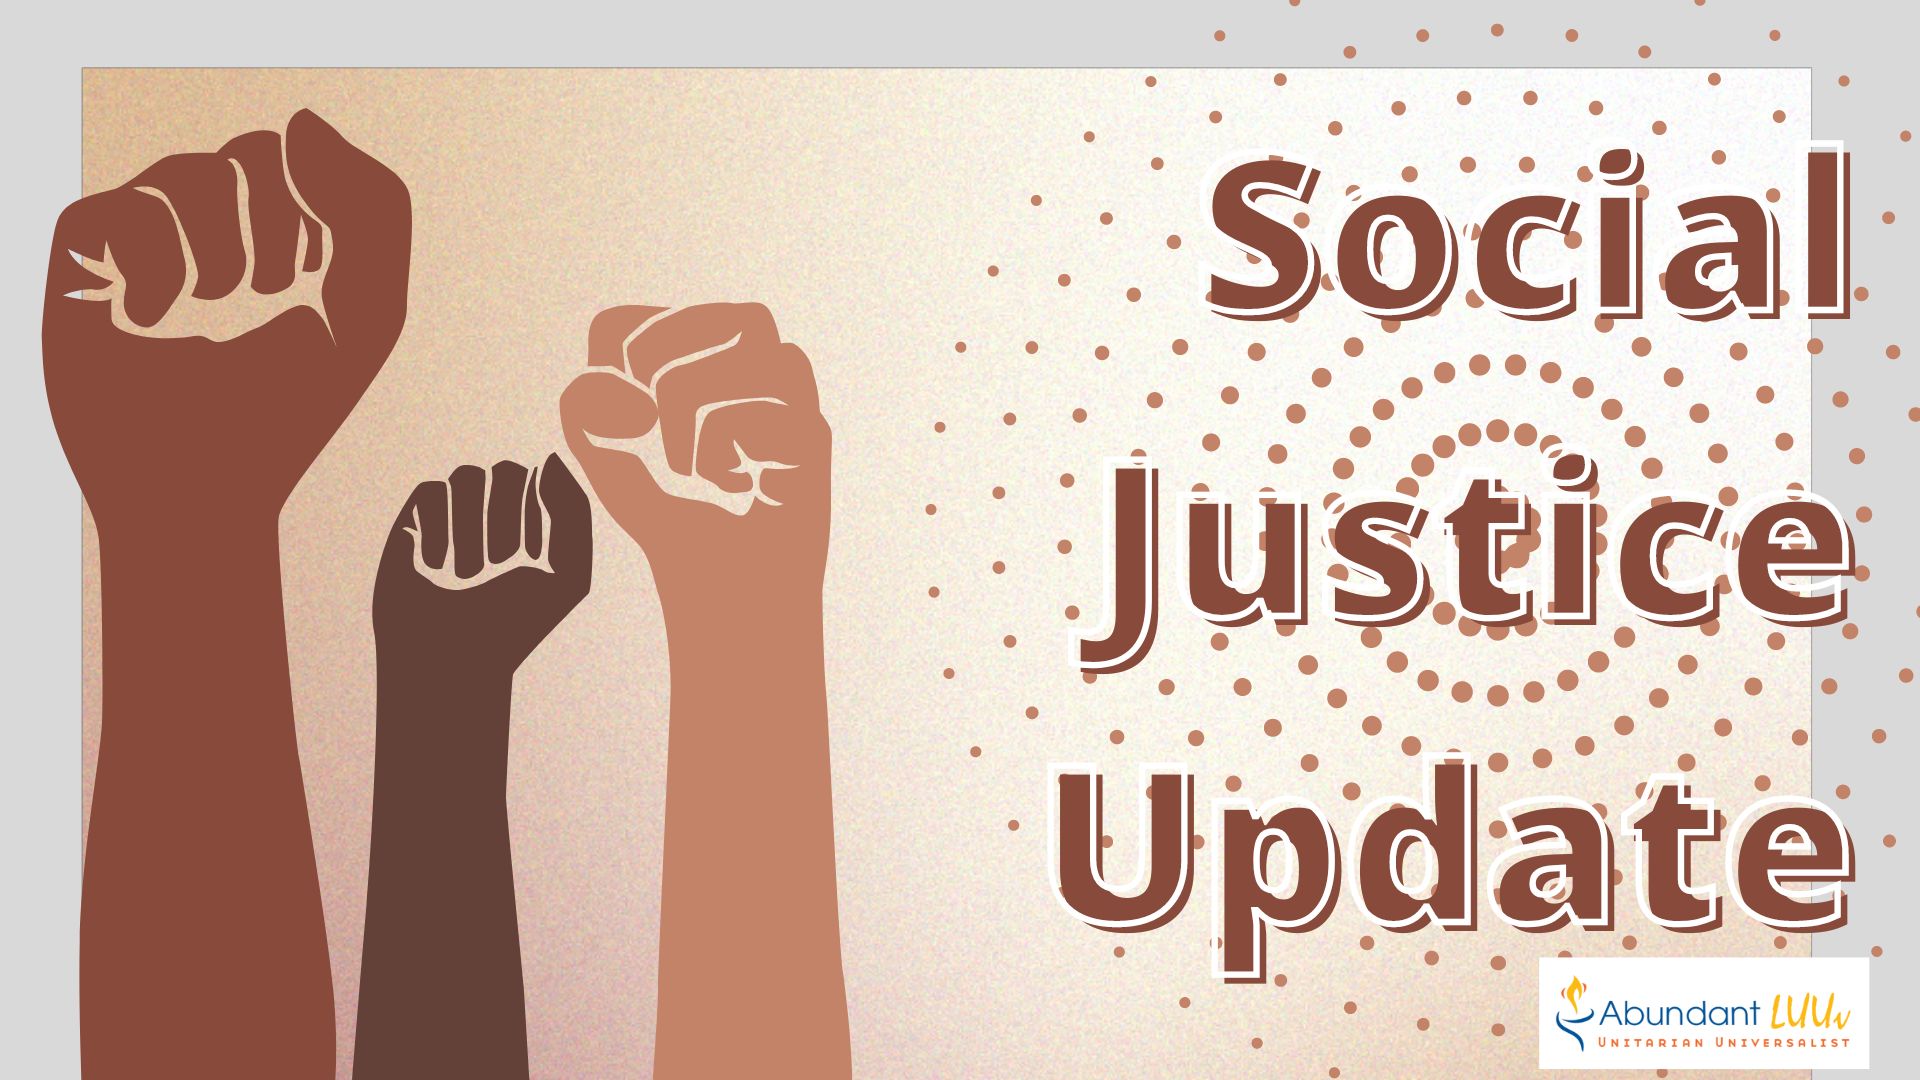 Social Justice Update with illustration of three multicultural fists raised.